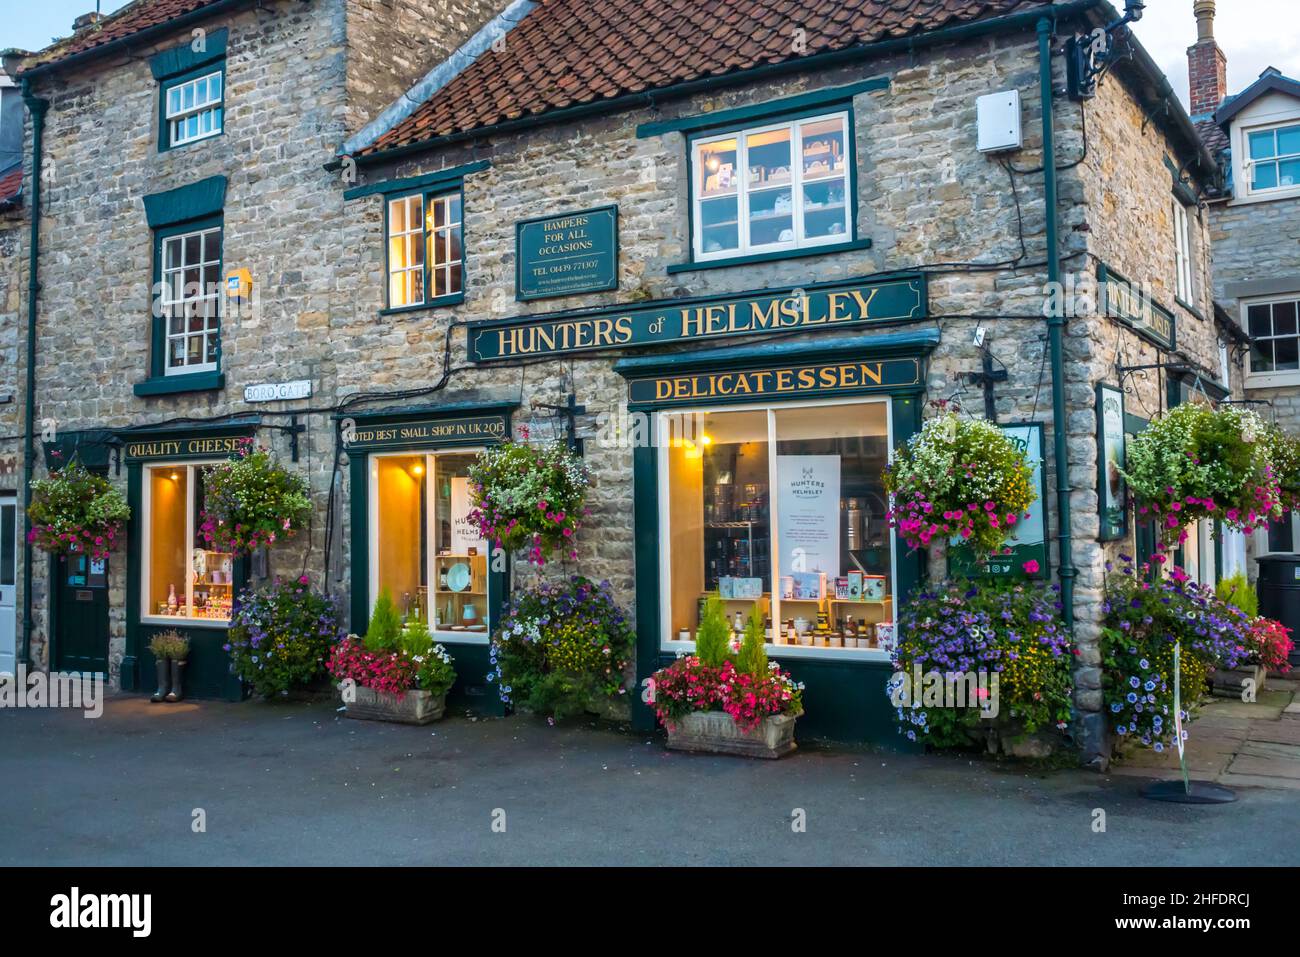 Hunters of Helmsley Delicatessen, located at Helmsley, North Yorkshire Stock Photo